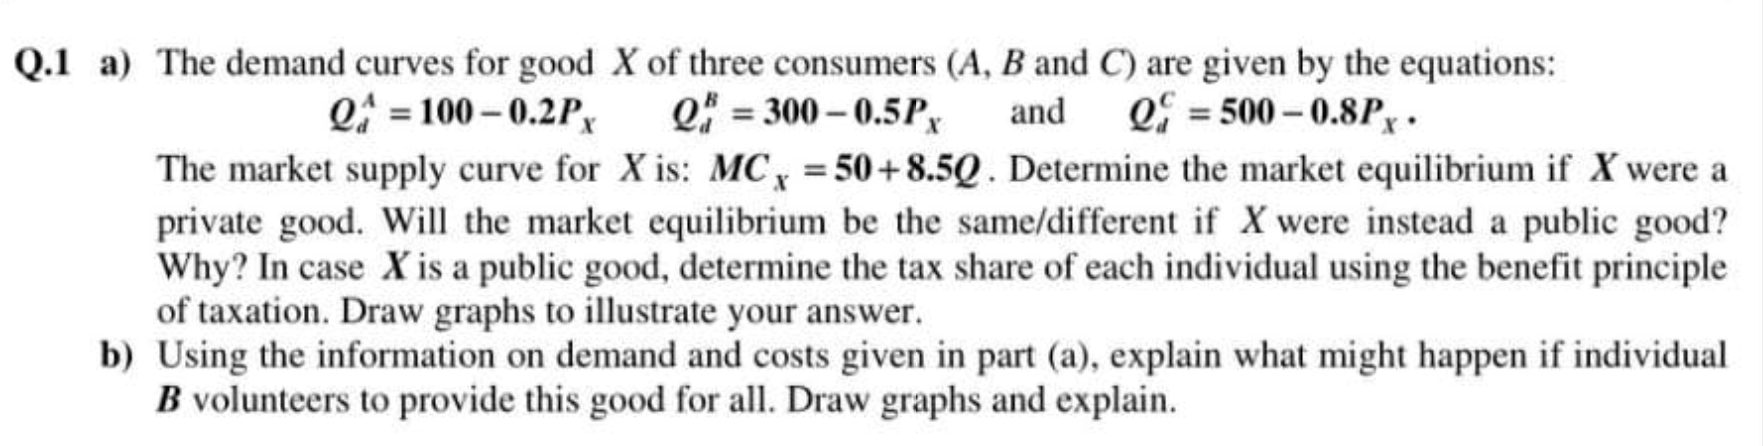 Q.1 a) The demand curves for good X of three consumers (A, B and C) are given by the equations: Q = 100 -0.2P Q = 300 - 0.5PX